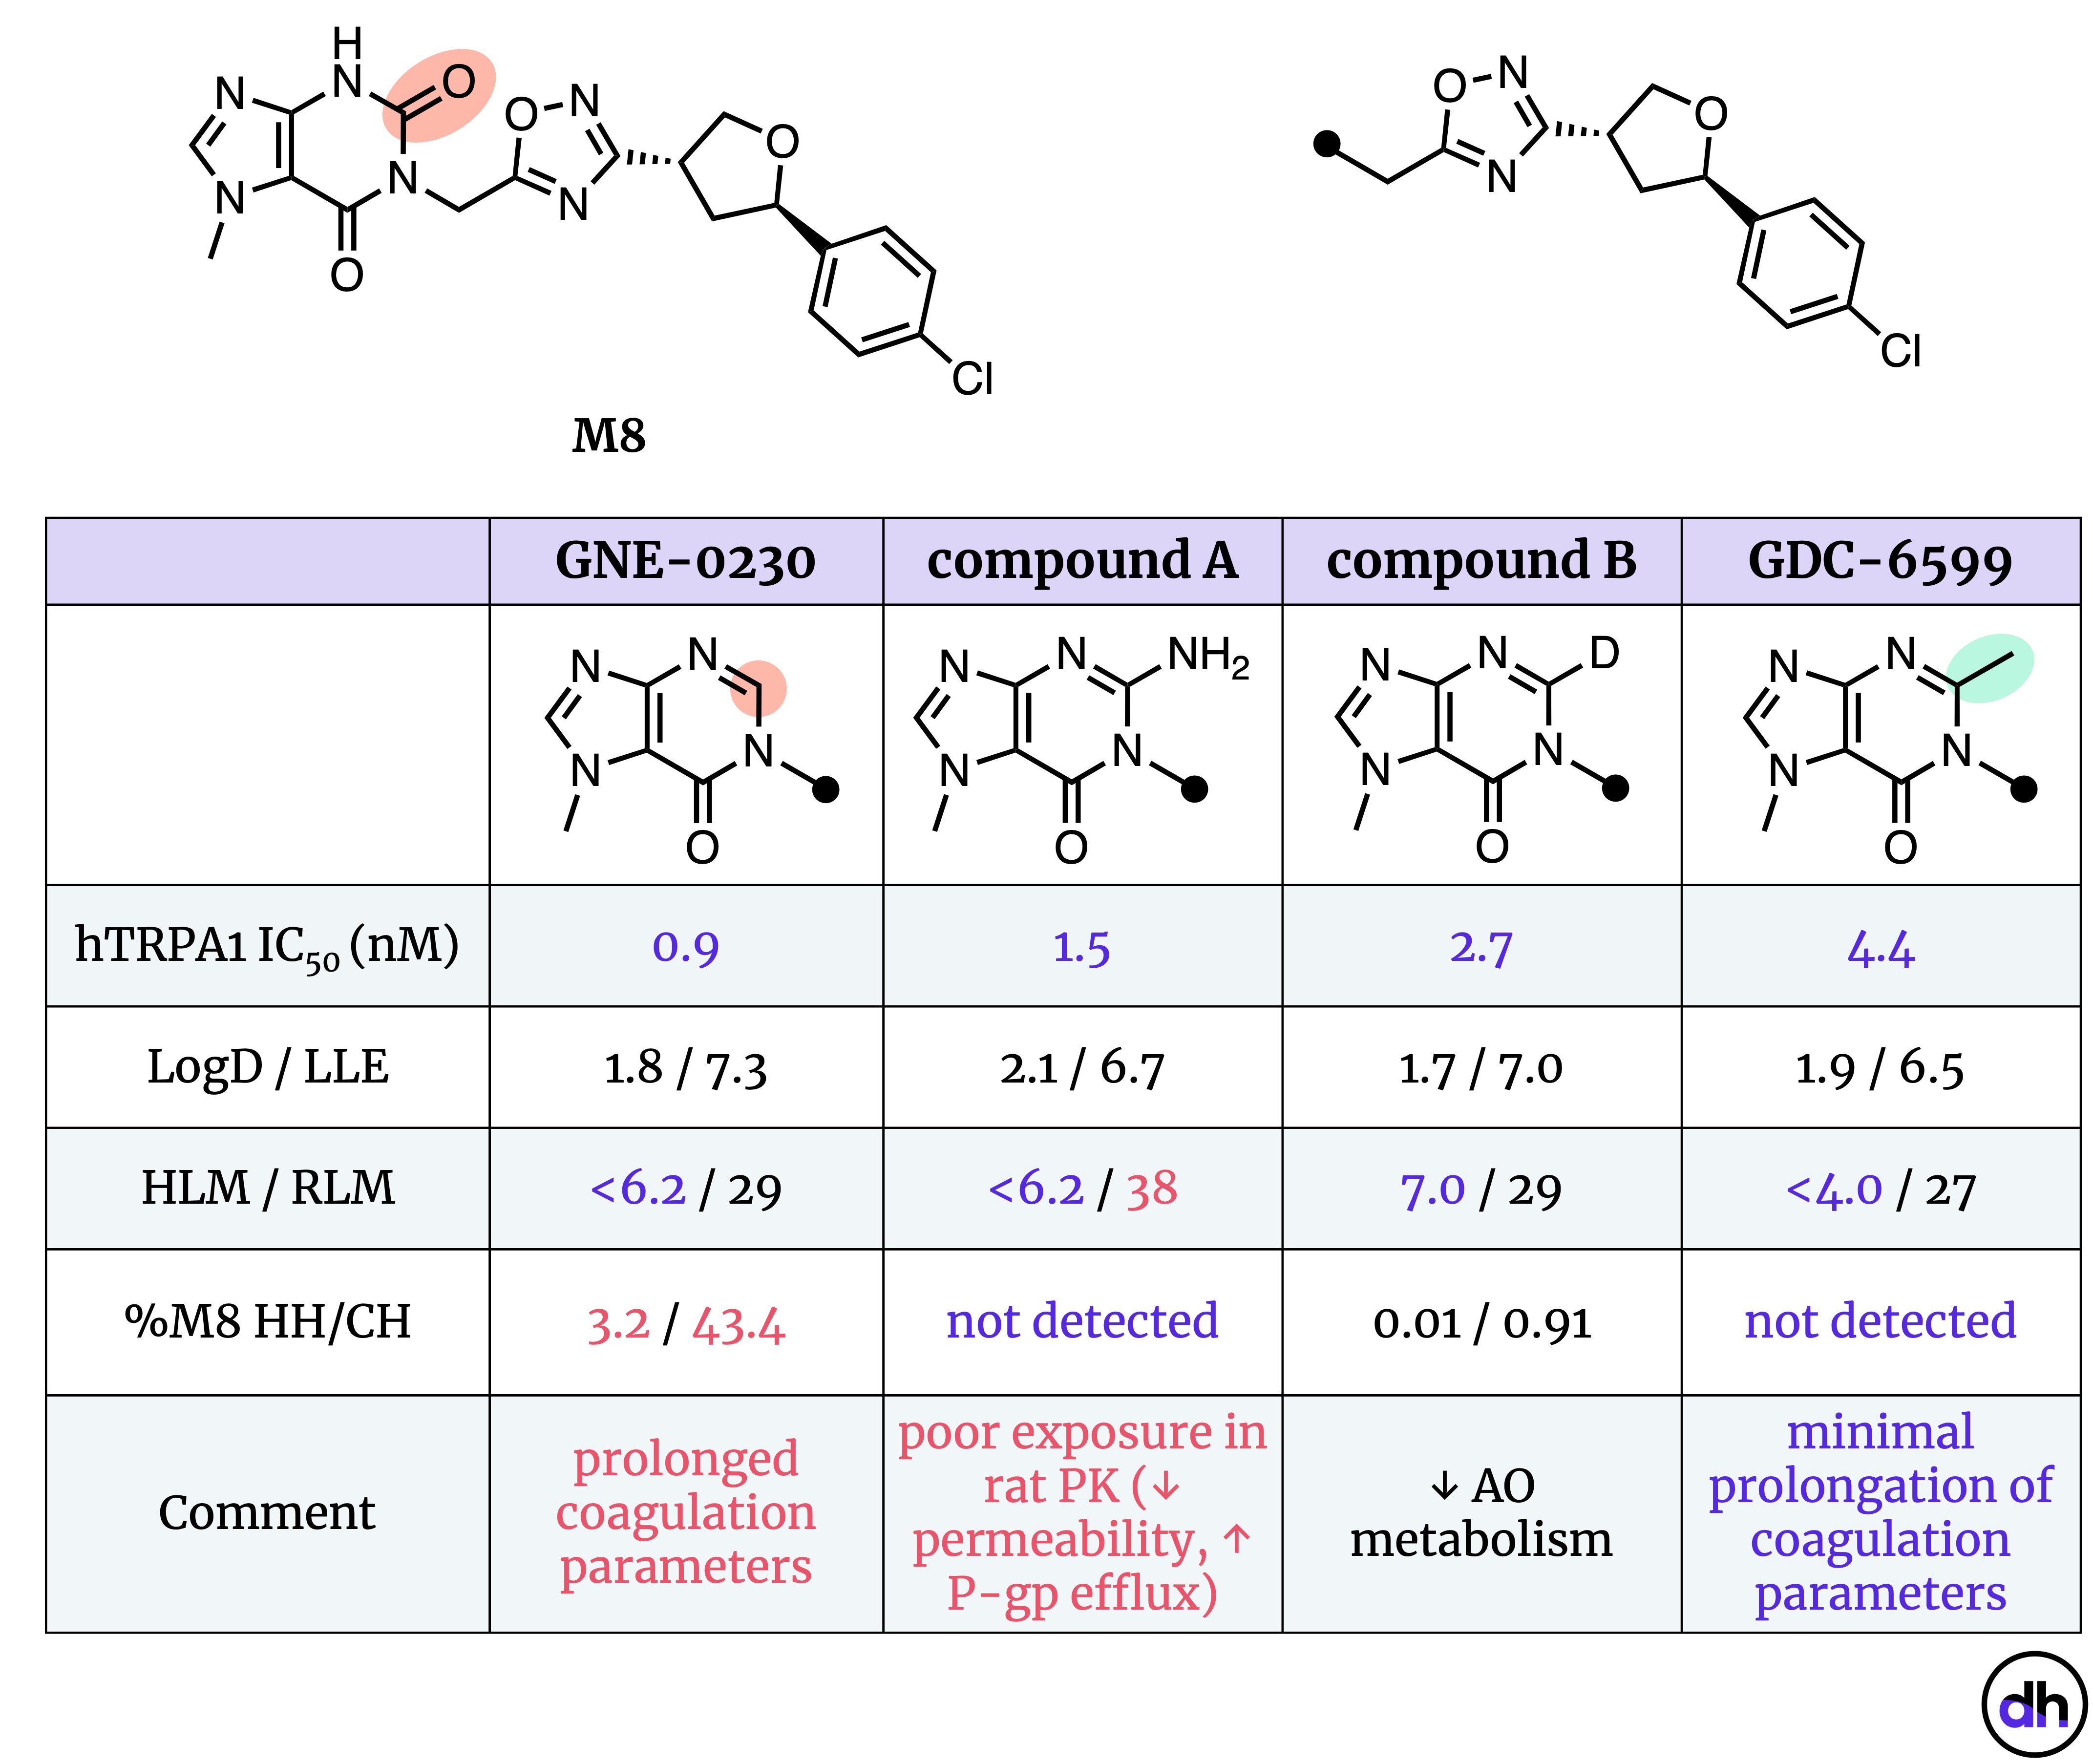 Table 3. Optimization of GNE-0230 into GDC-6599. HH = human hepatocytes, CH = cyno hepatocytes. hTRPA1 was determined via a calcium influx dose−response assay on the CHO cell line.